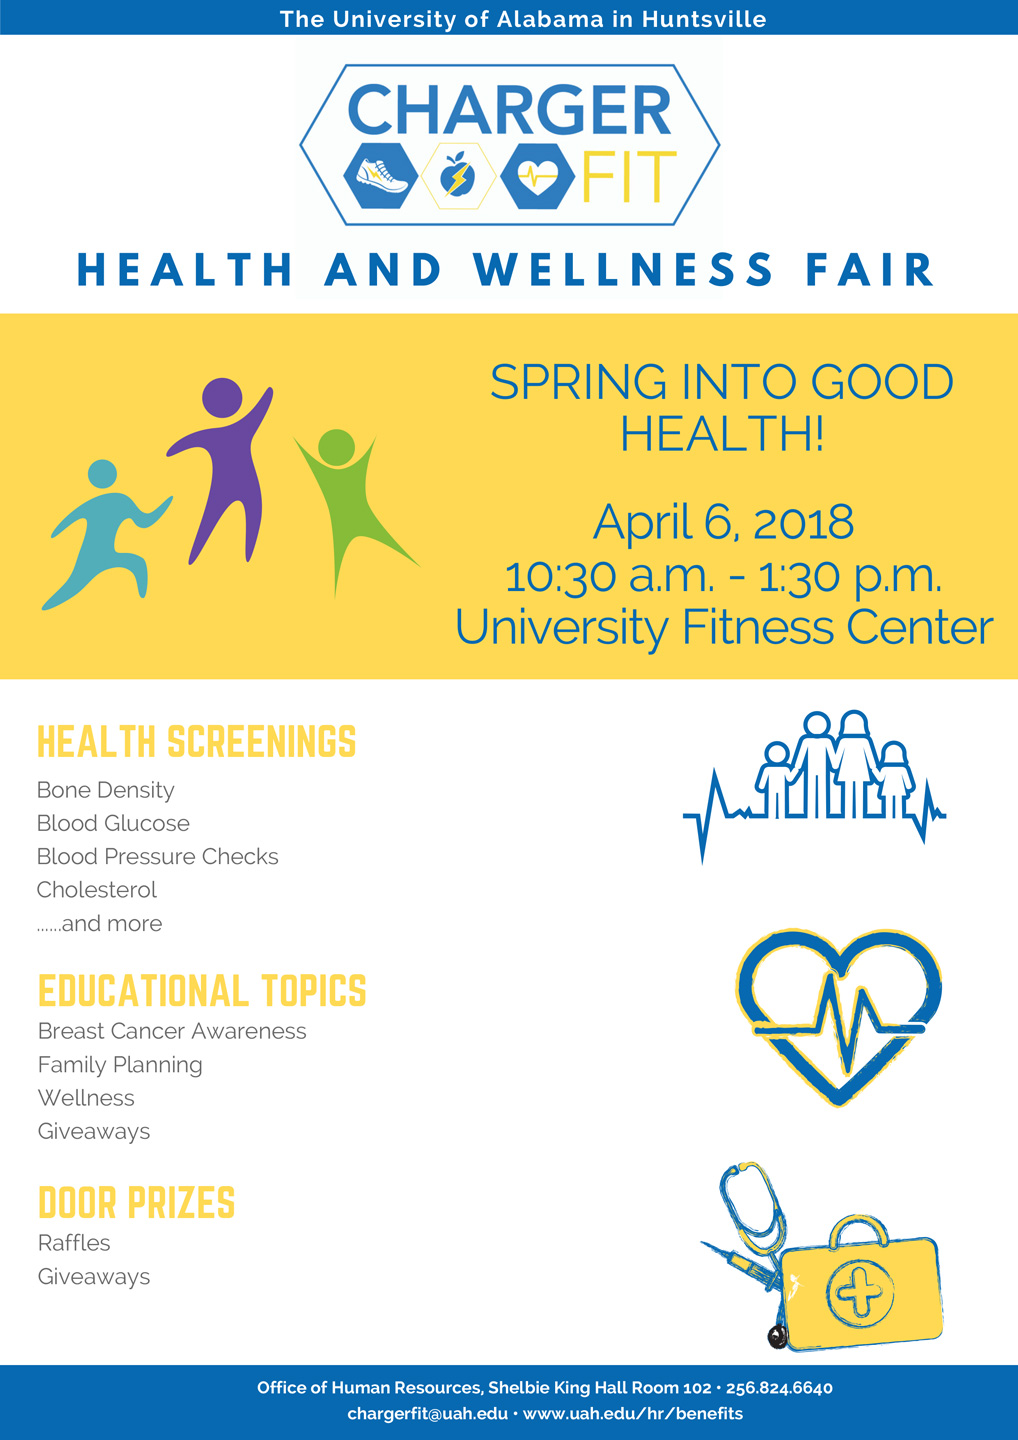 Chargerfit Health and Wellness Fair